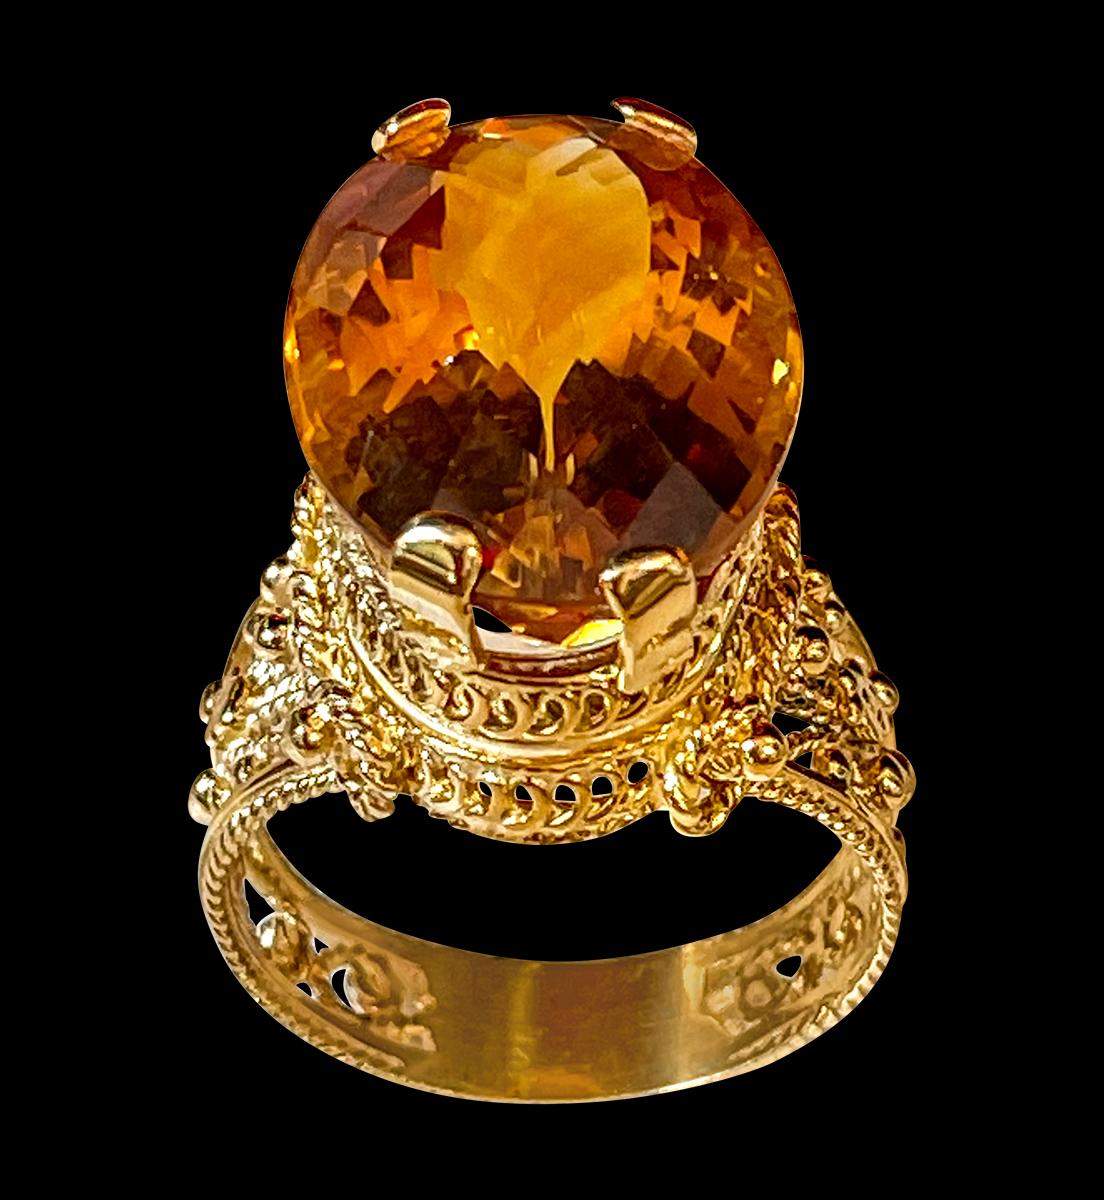 Approximately 20 Carat Natural  Long Oval  Checkerboard  Citrine Cocktail  Ring in 14 Karat Yellow Gold, Estate size 12
This is a ring which has a  approximately 20-22  carat of high quality Citrine stone. The stone is 25X17 MM and  12  mm